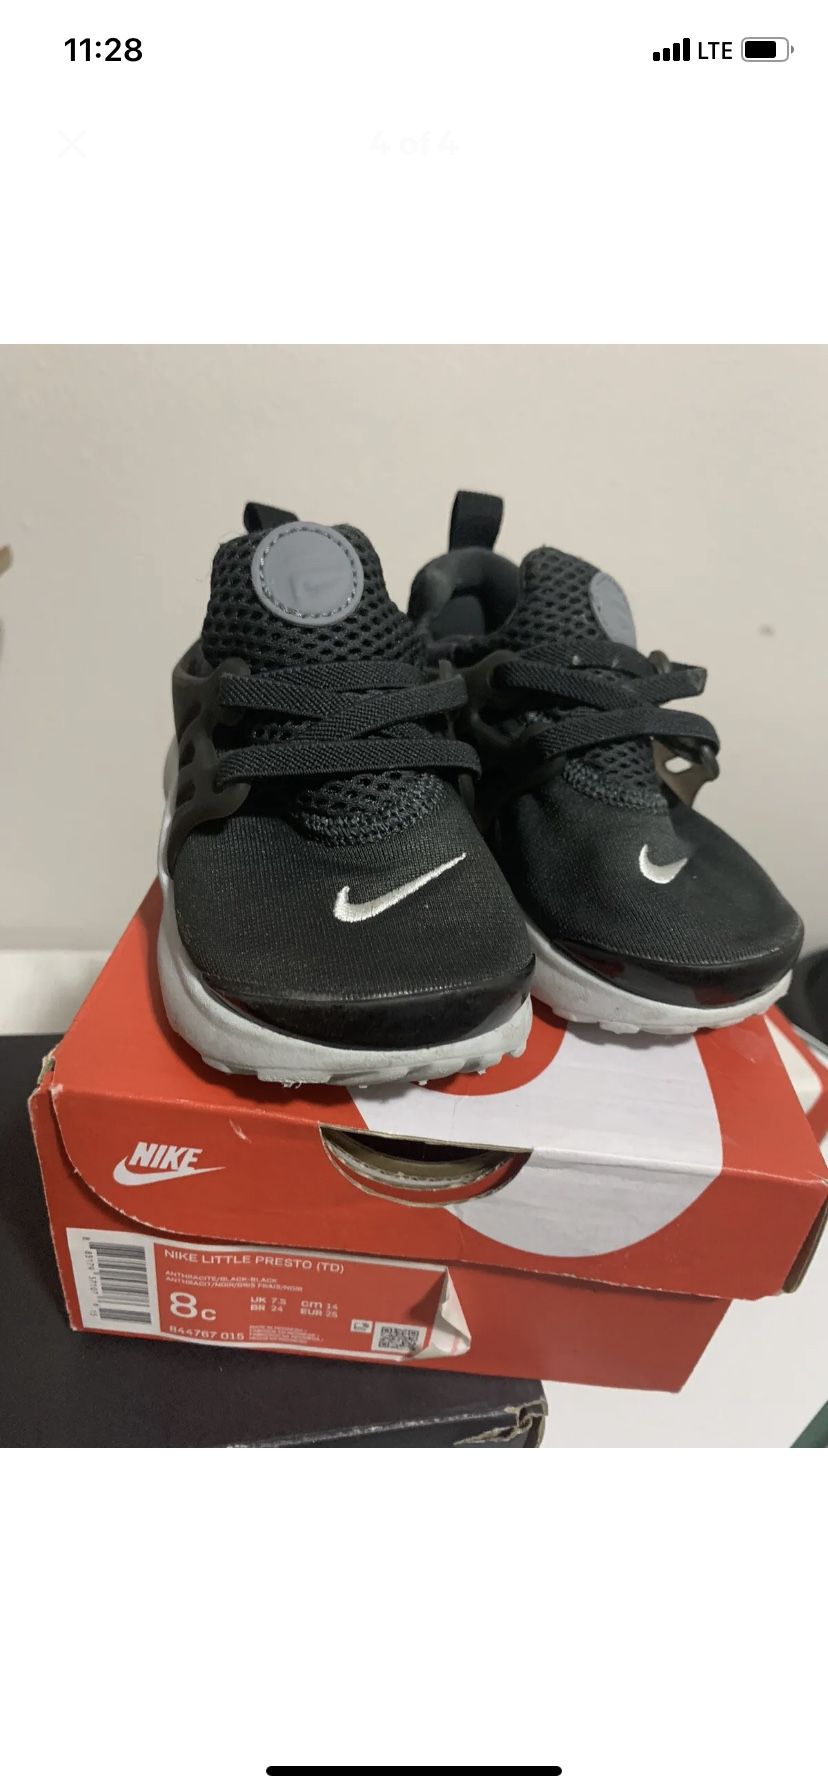 Nike Little Presto Toddler's Shoes Sneakers Gray Size 8c